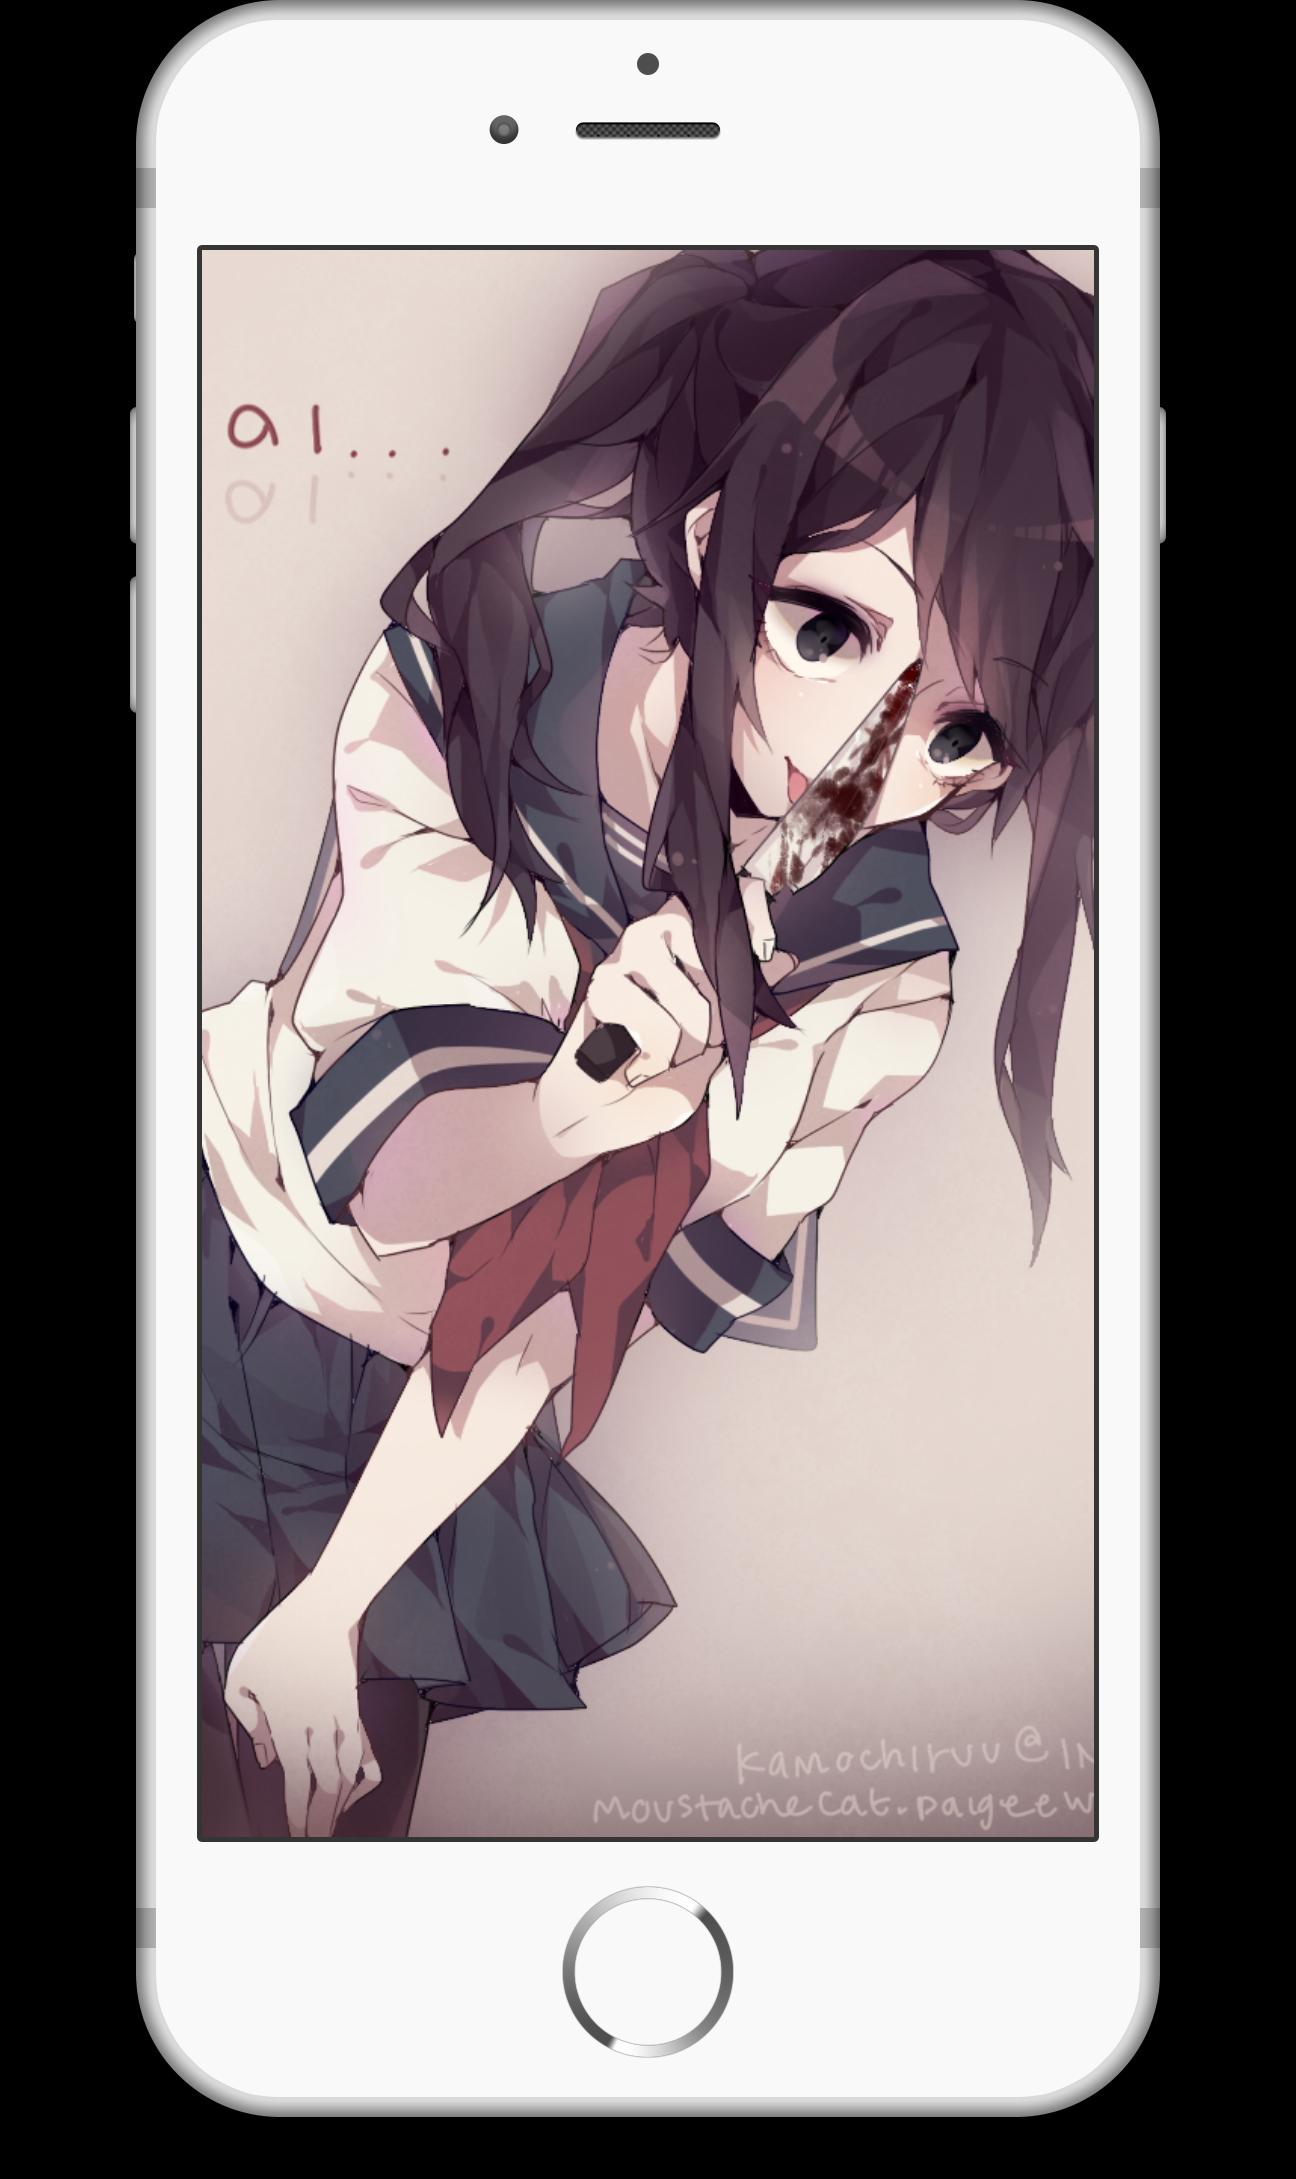 Yandere Simulator Anime Girl Wallpapers 4k Hd For Android Apk